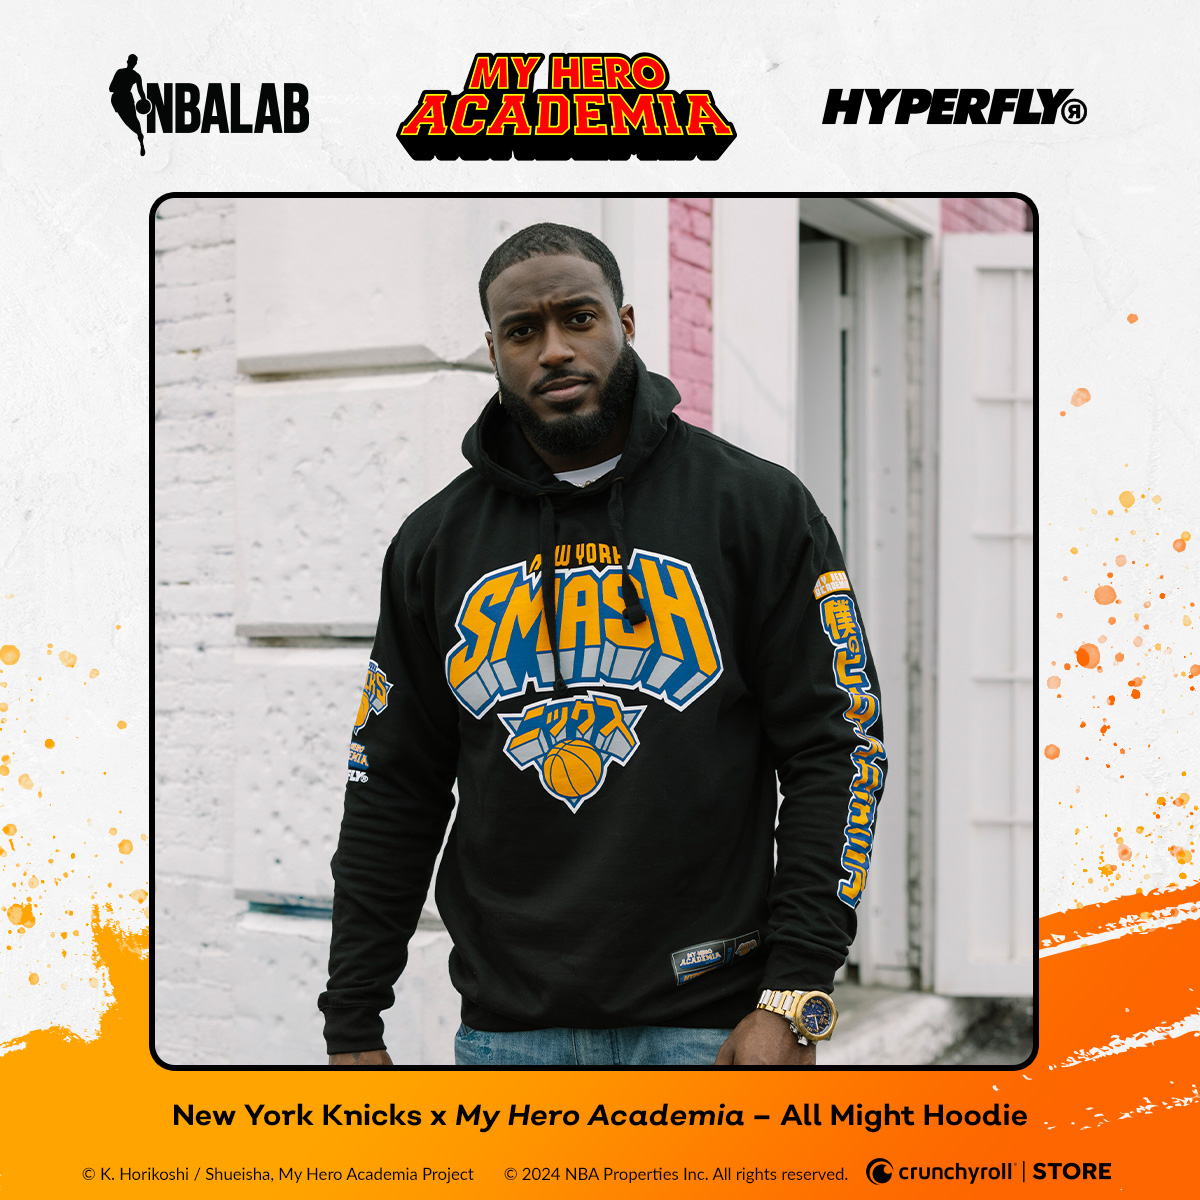 This limited edition @NBA x @MHAOfficial clothing collab by @hyperfly is a slam dunk. 🏀🔥 Gear up for the win with your favorite teams (and your favorite anime) now! 👉 GO: got.cr/mhahyperfly-tw